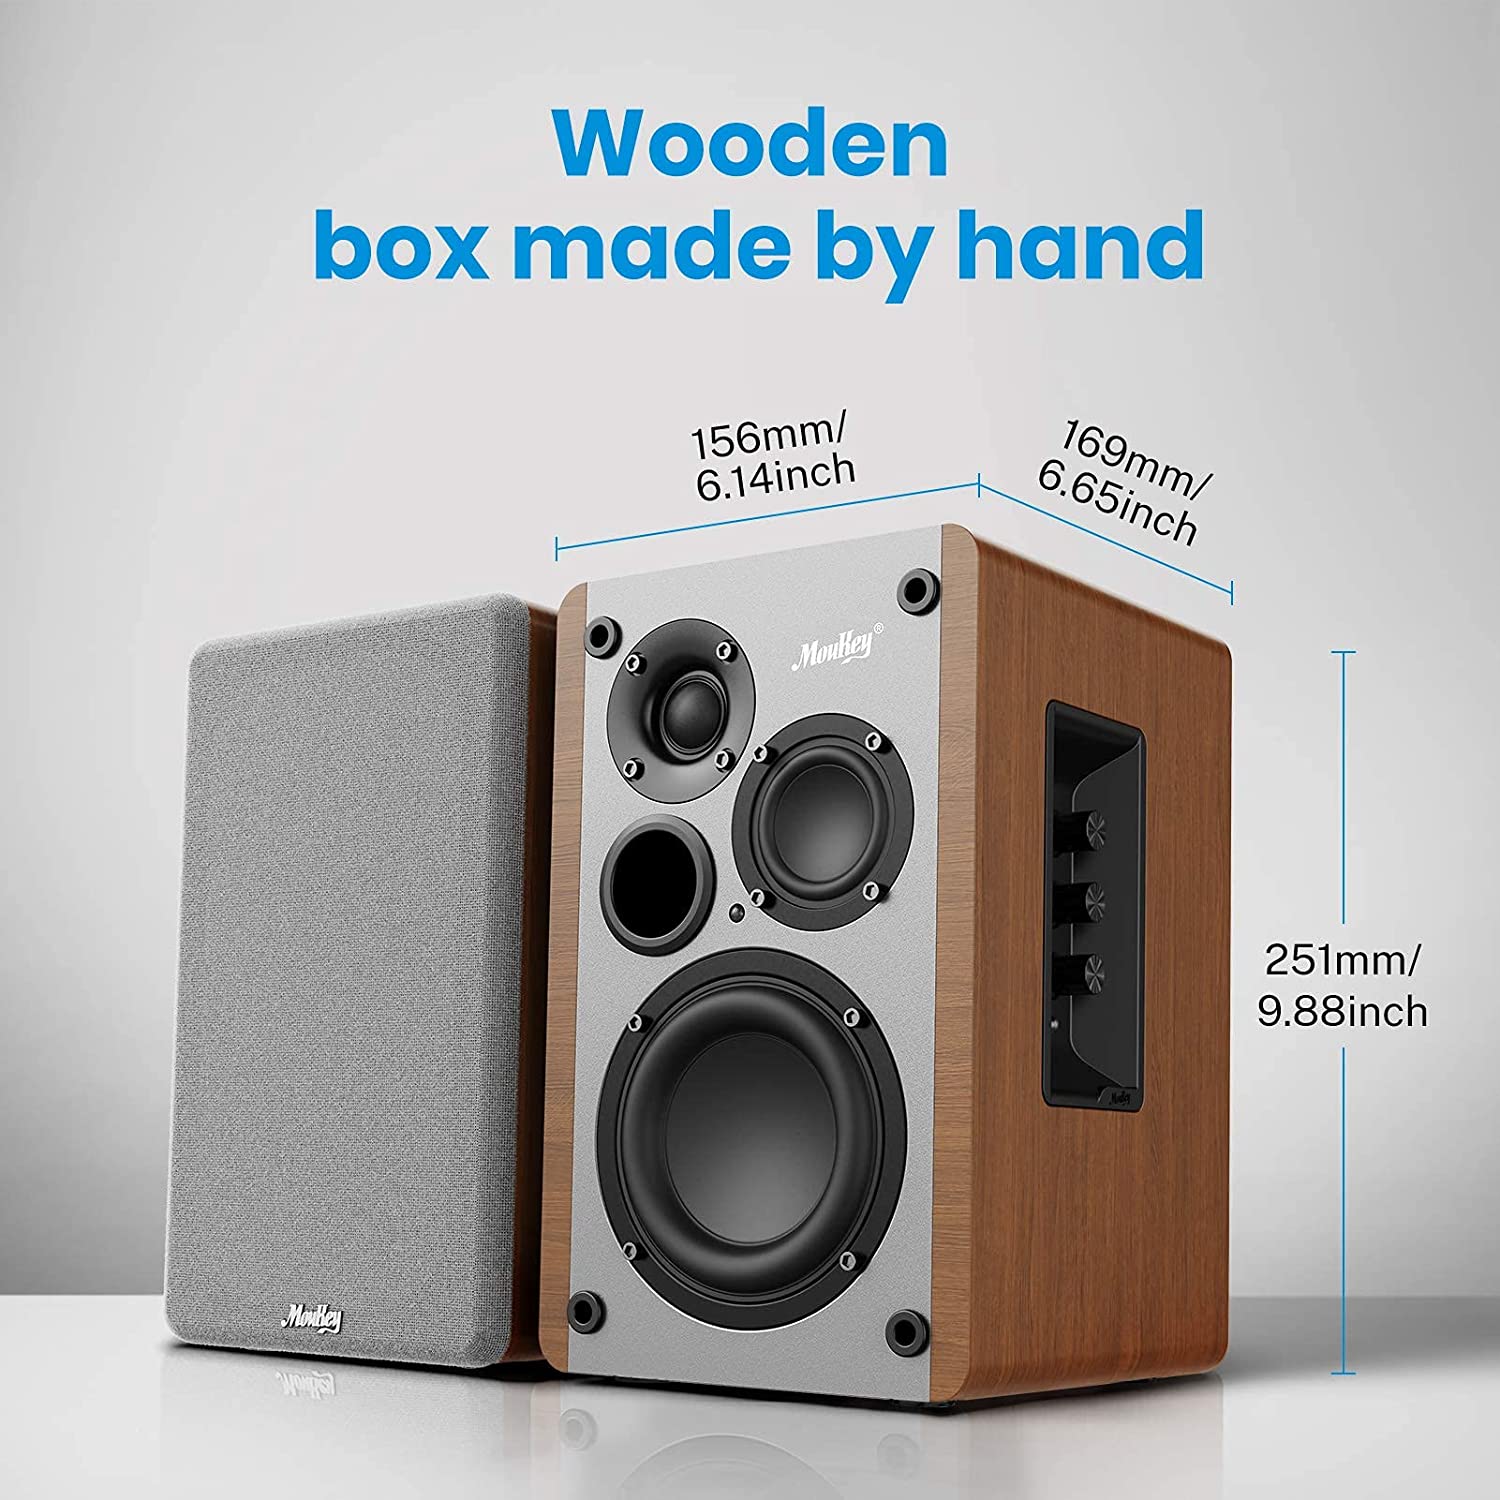 Moukey Powered Bookshelf Speakers Pair- Bluetooth 5.0 Studio Monitors, 3 Way 4+2+1‘’ Speakers, Wooden 2.0 Stereo Active Speakers - 50 Watts RMS (MA20-1), Lime - image 2 of 7